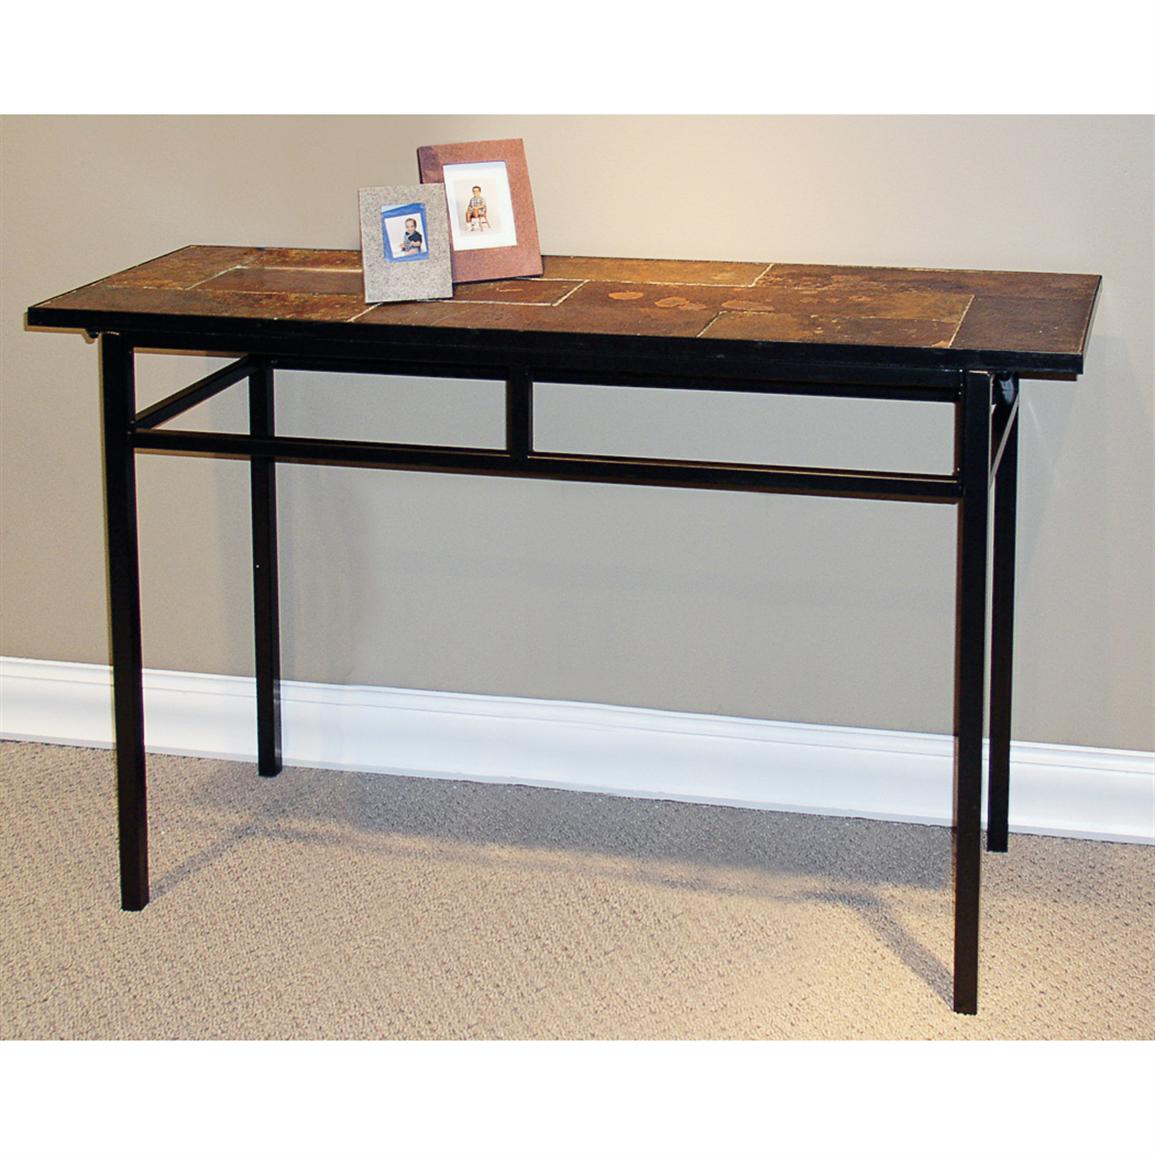 Picture of 4D Concepts 601636 Sofa Table with Slate Top in Metal and Slate